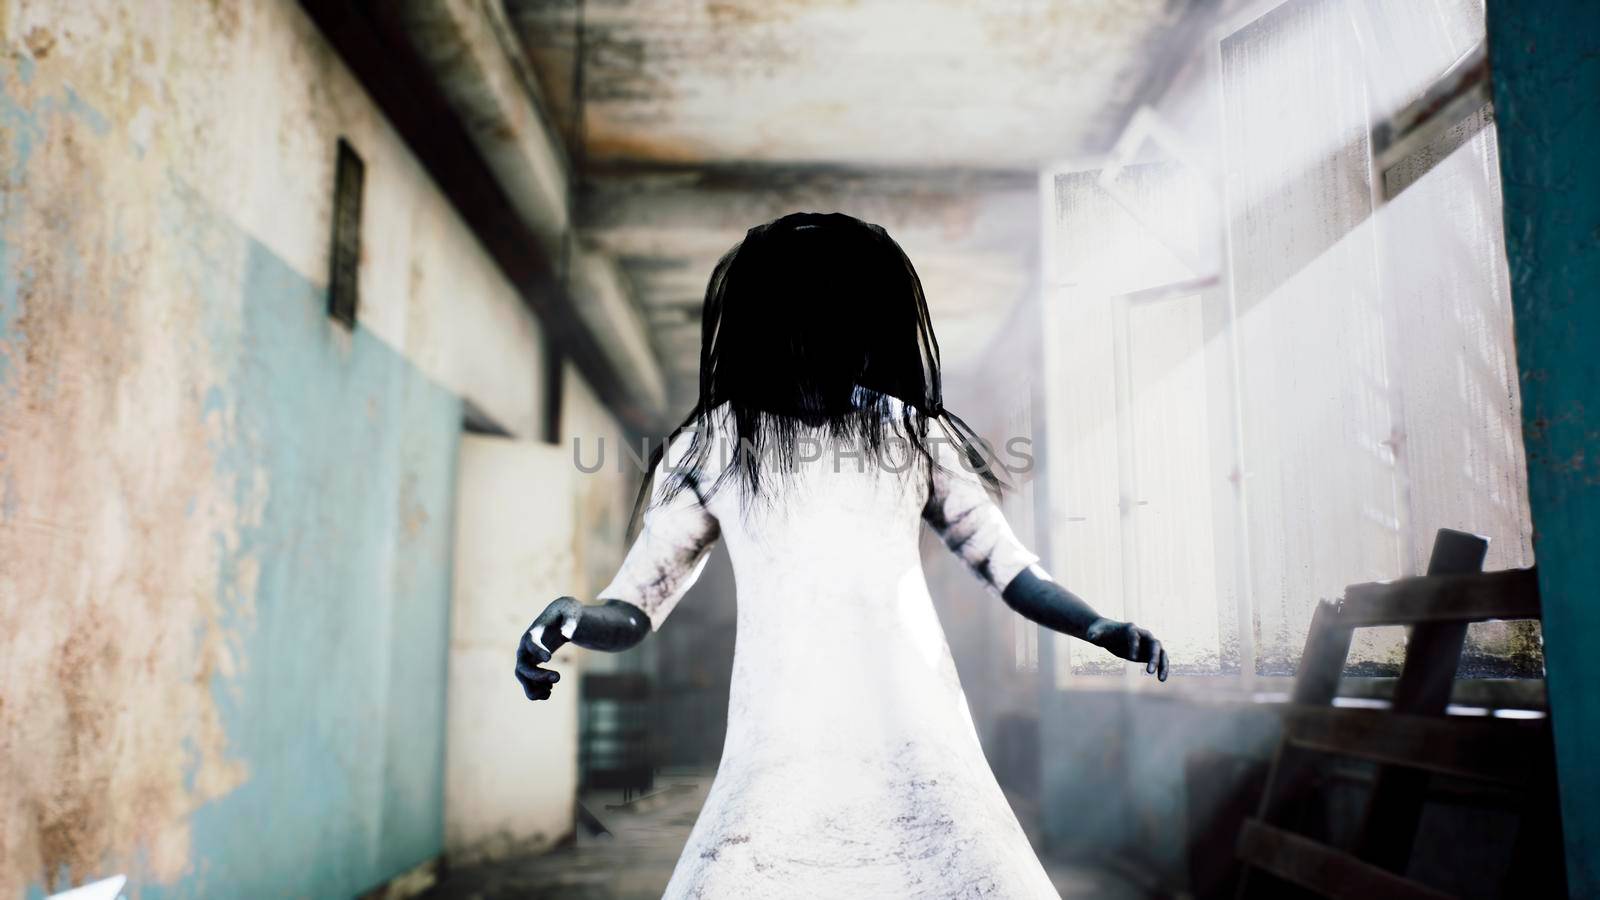 A horrible girl in a white dress, looking like a zombie, moves through an abandoned mystical house. View of an abandoned apocalyptic house. 3D Rendering. by designprojects